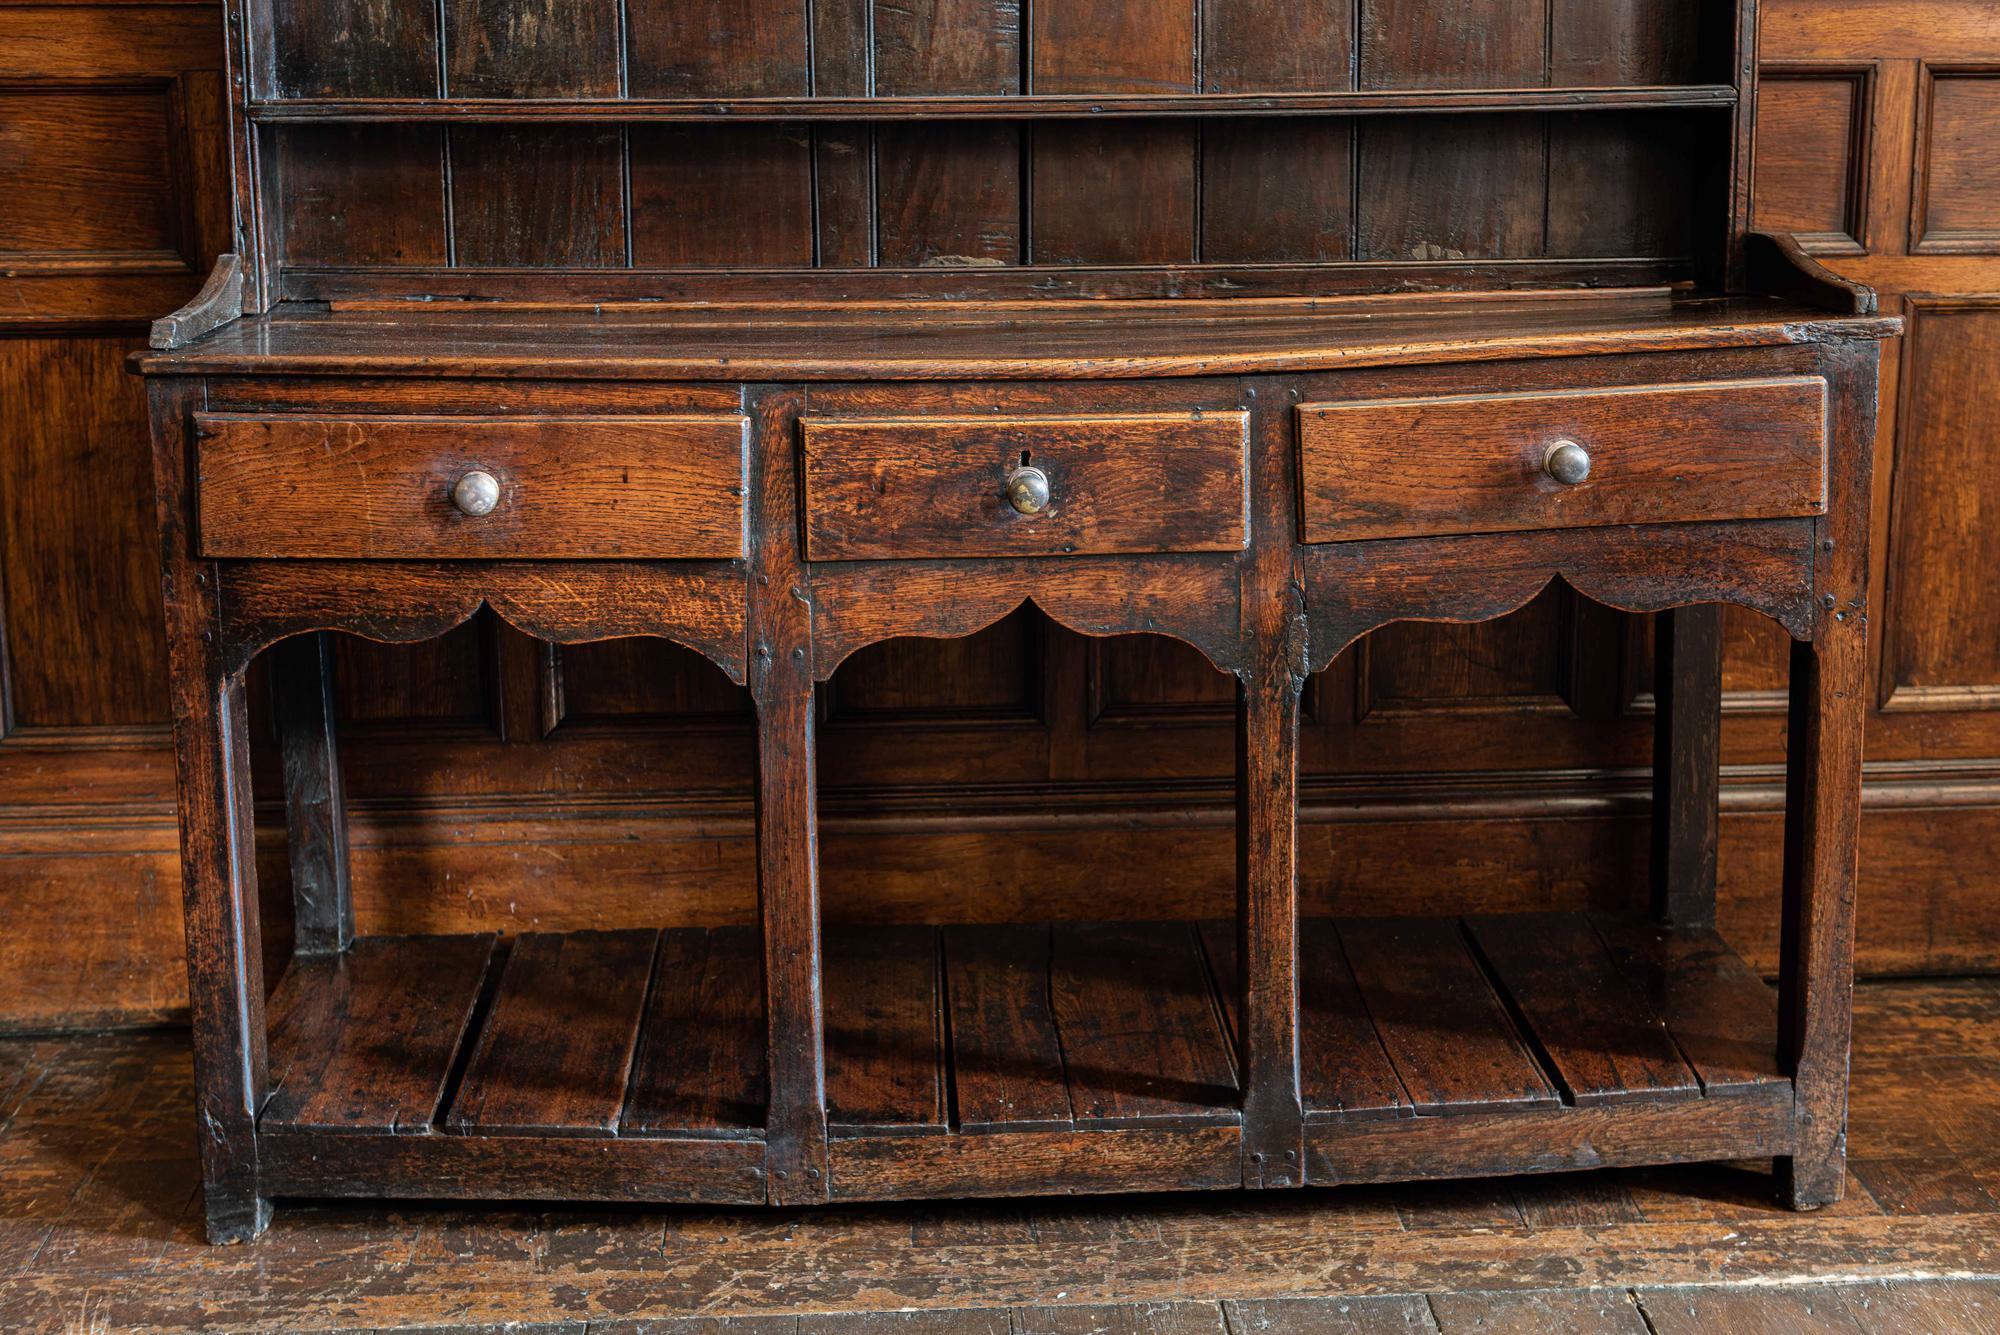 18th century welsh pot board dresser
A diminutive and rustic 18th century welsh mixed oak, ash and pine pot board dresser.
With three central drawers and a country carved apron to the front. Twisty and knarly with great color and patina, an